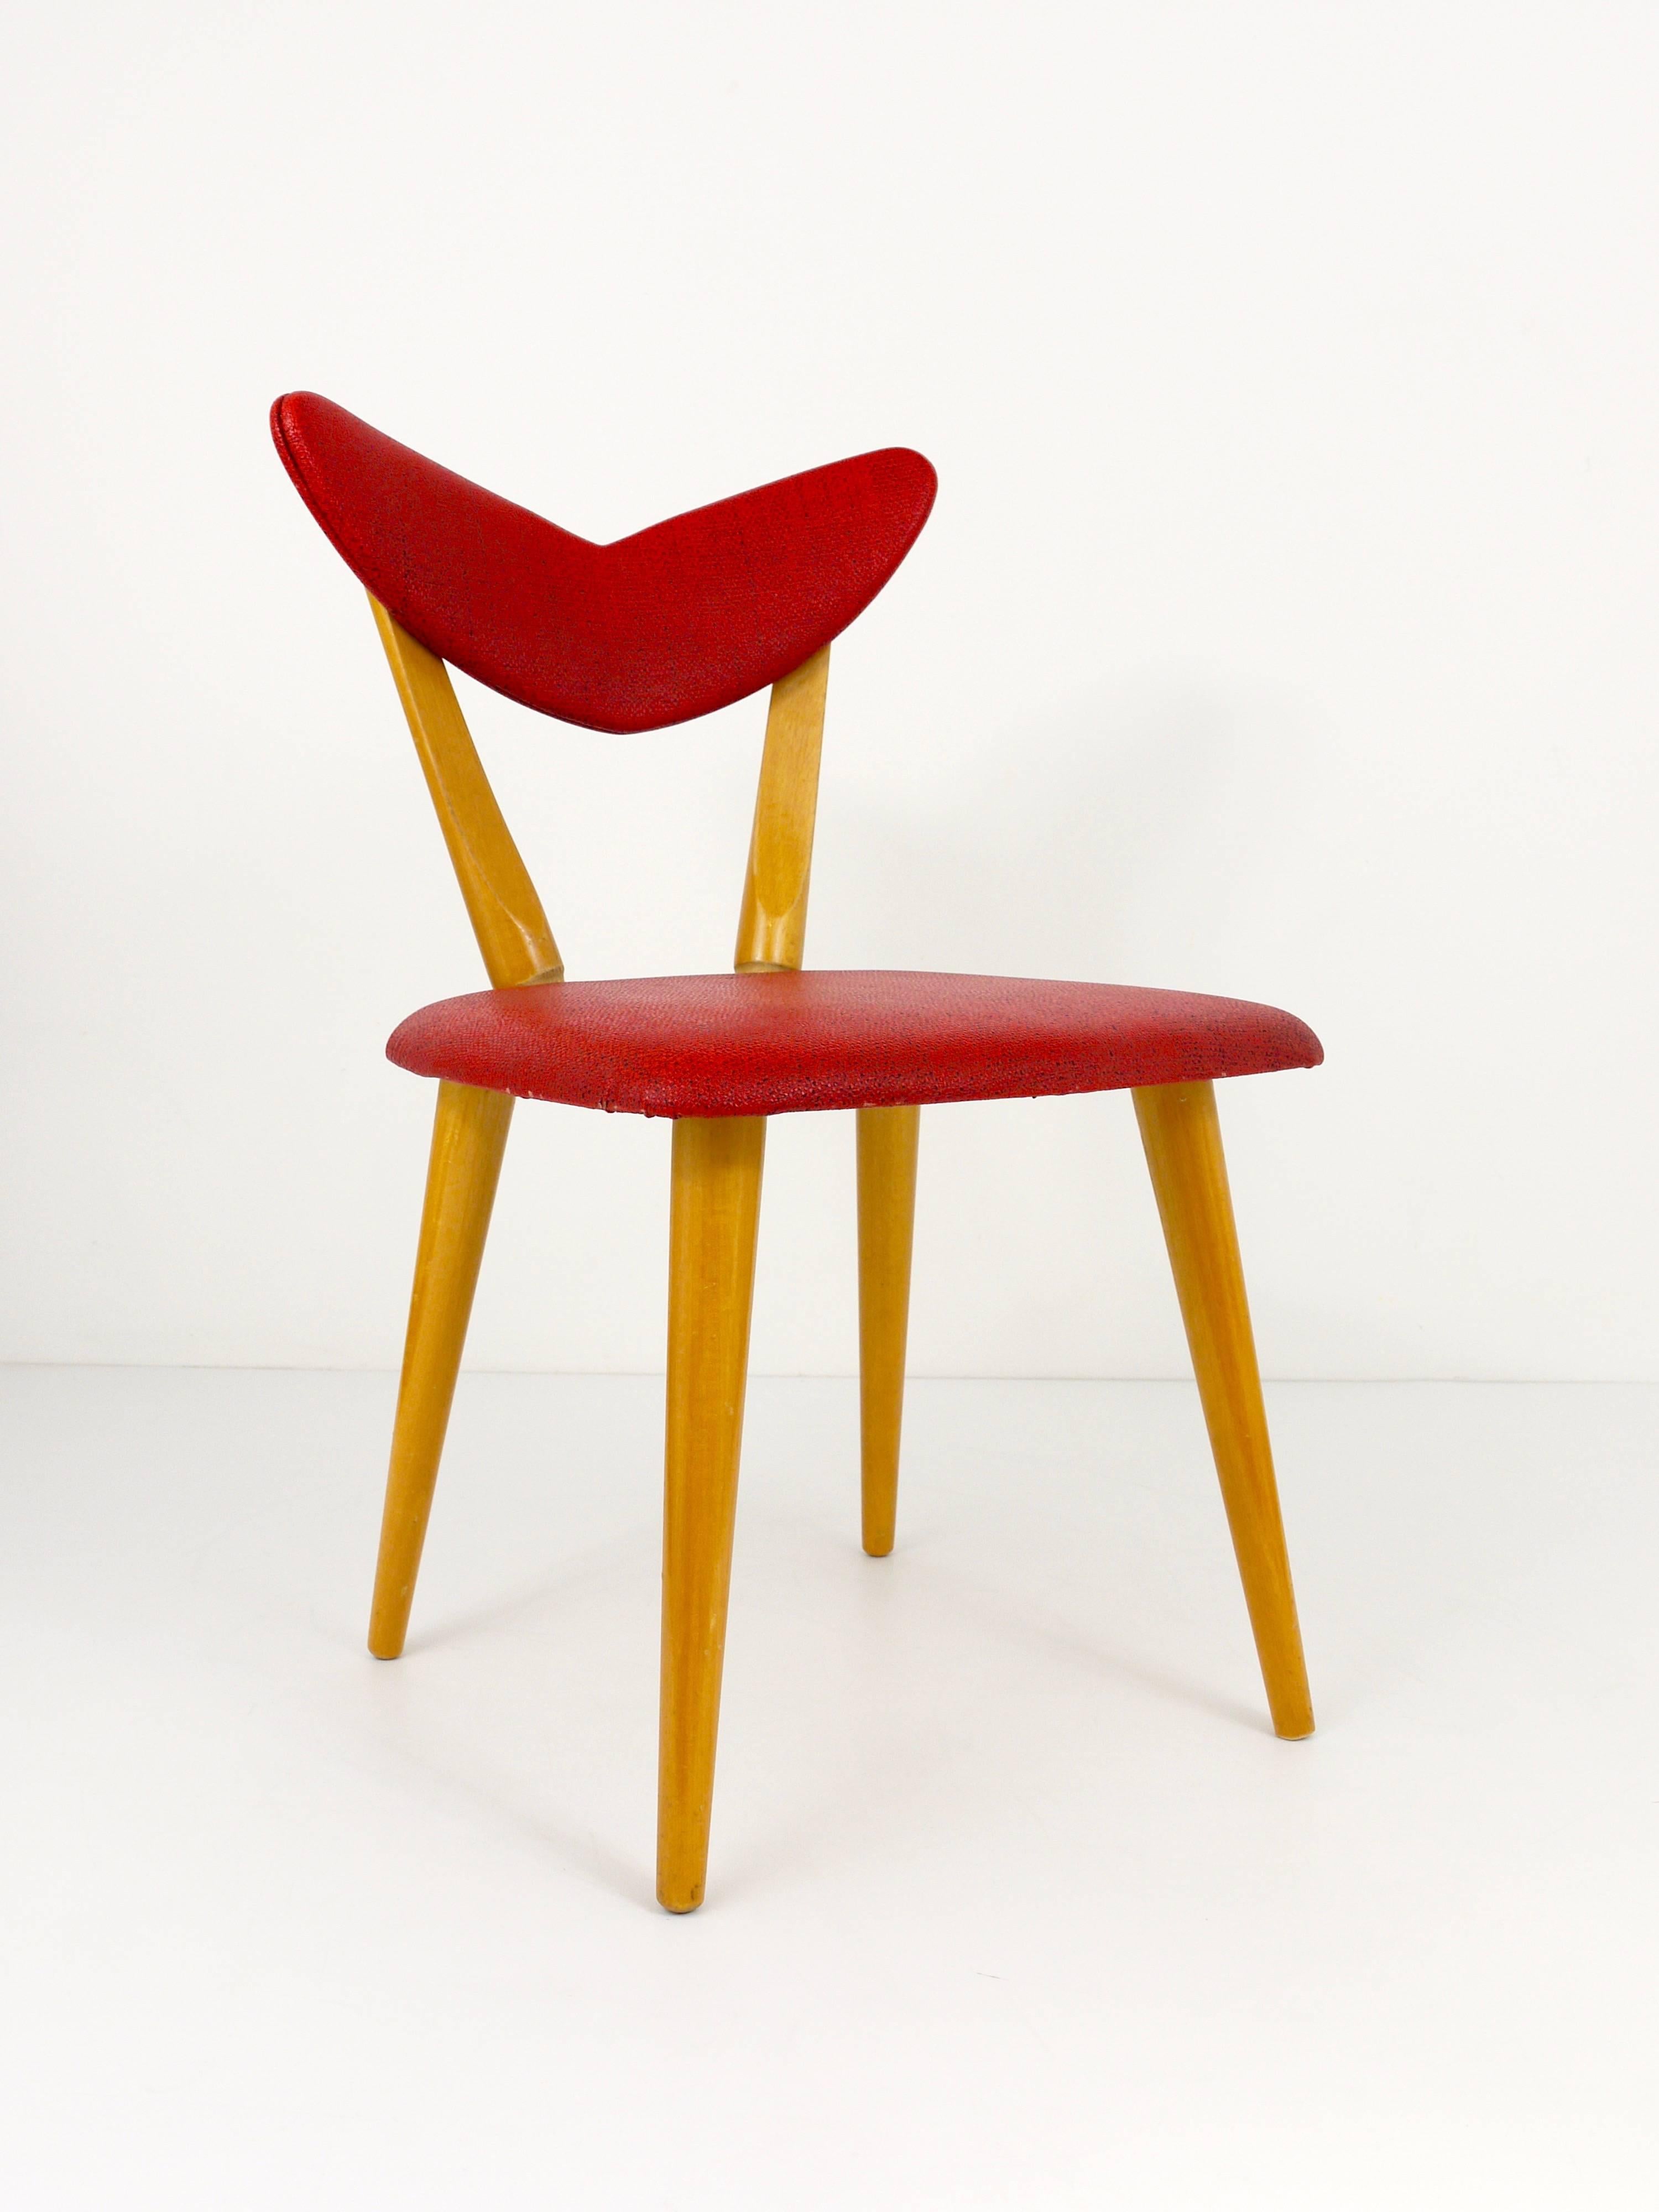 Red Heart Mid Century Modern Chair for Children,  Austria, 1950s For Sale 3